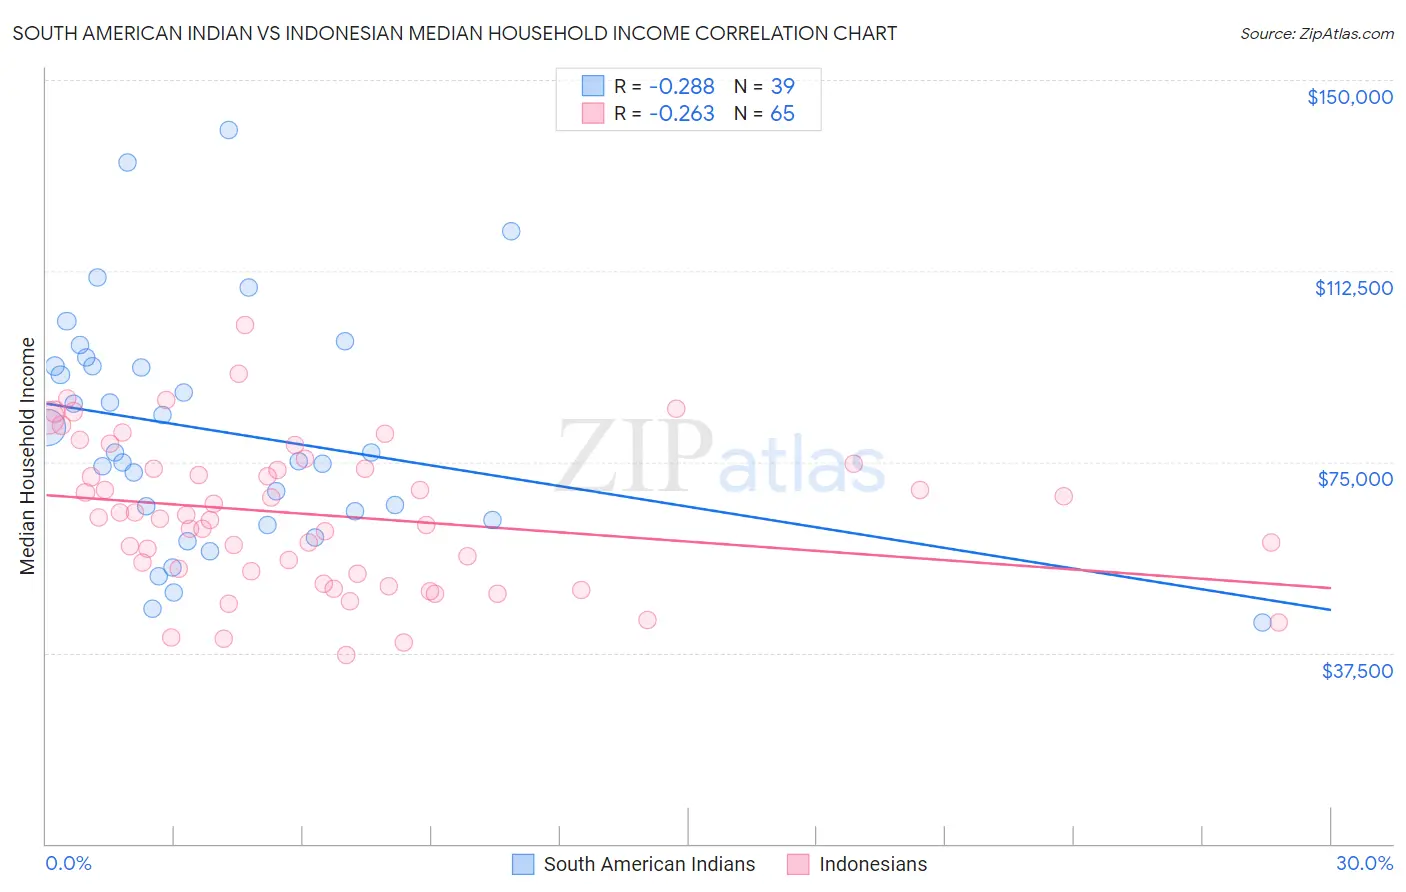 South American Indian vs Indonesian Median Household Income